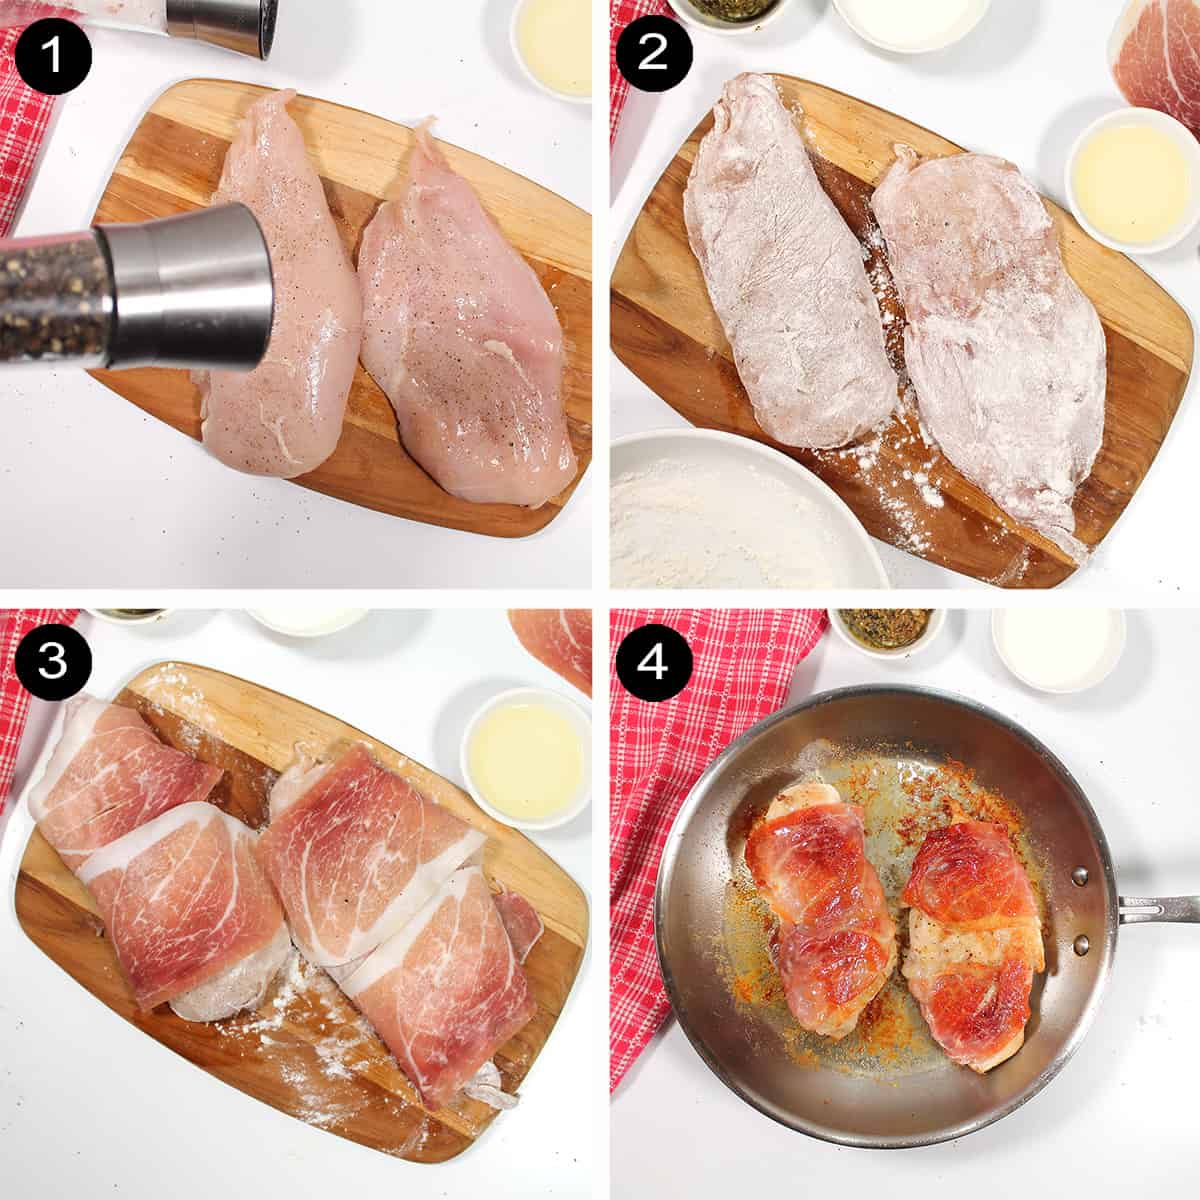 Steps 1-4 to prepare chicken wrapped with prosciutto.